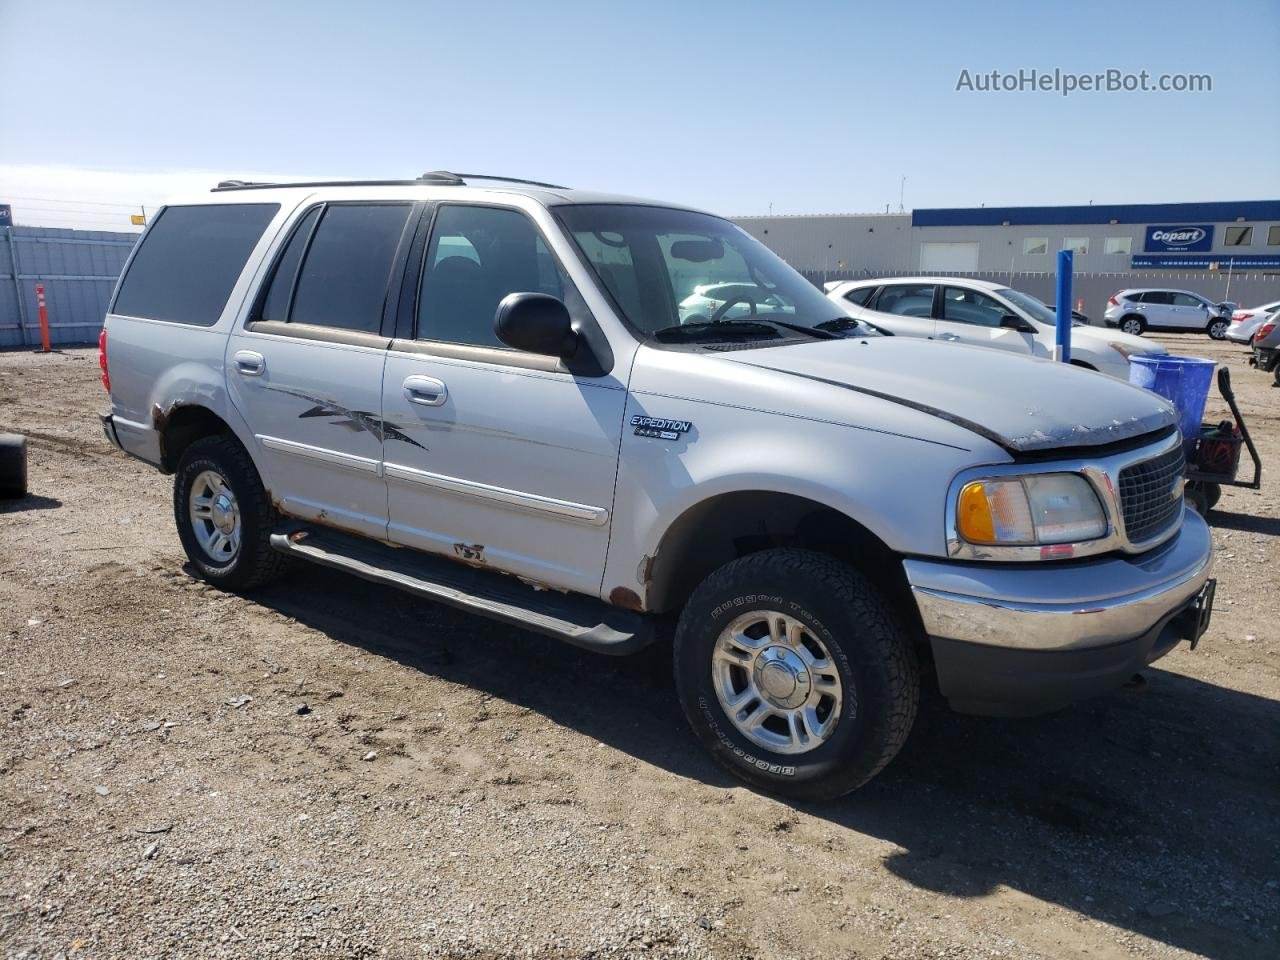 2001 Ford Expedition Xlt Silver vin: 1FMPU16L41LB29025